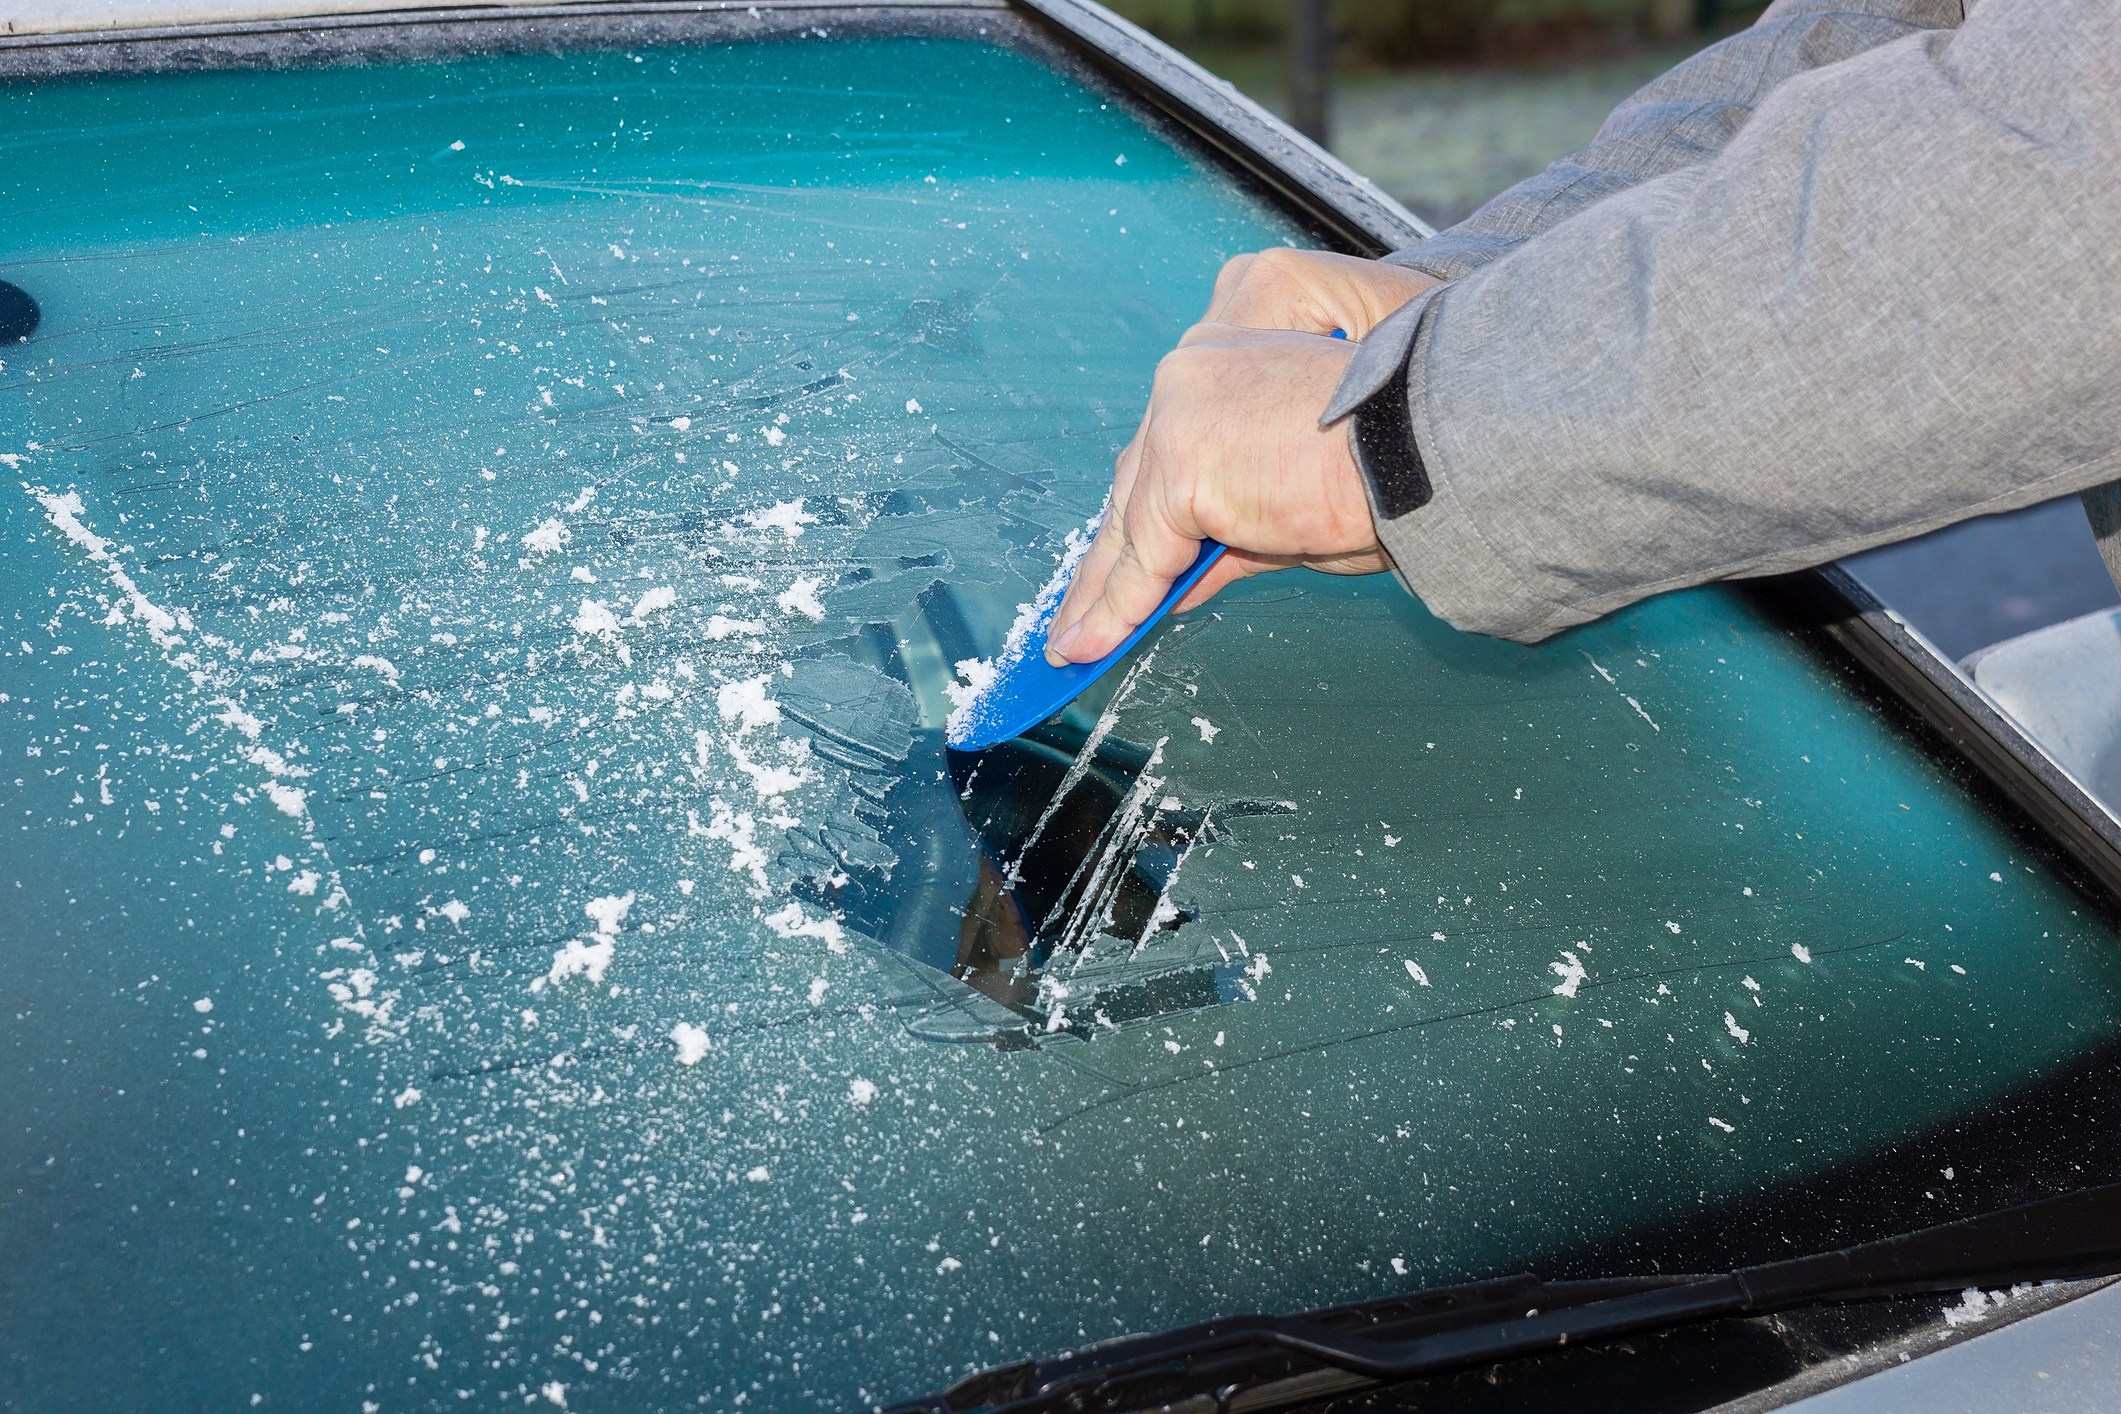 How To Get Ice Off Car Windshield?